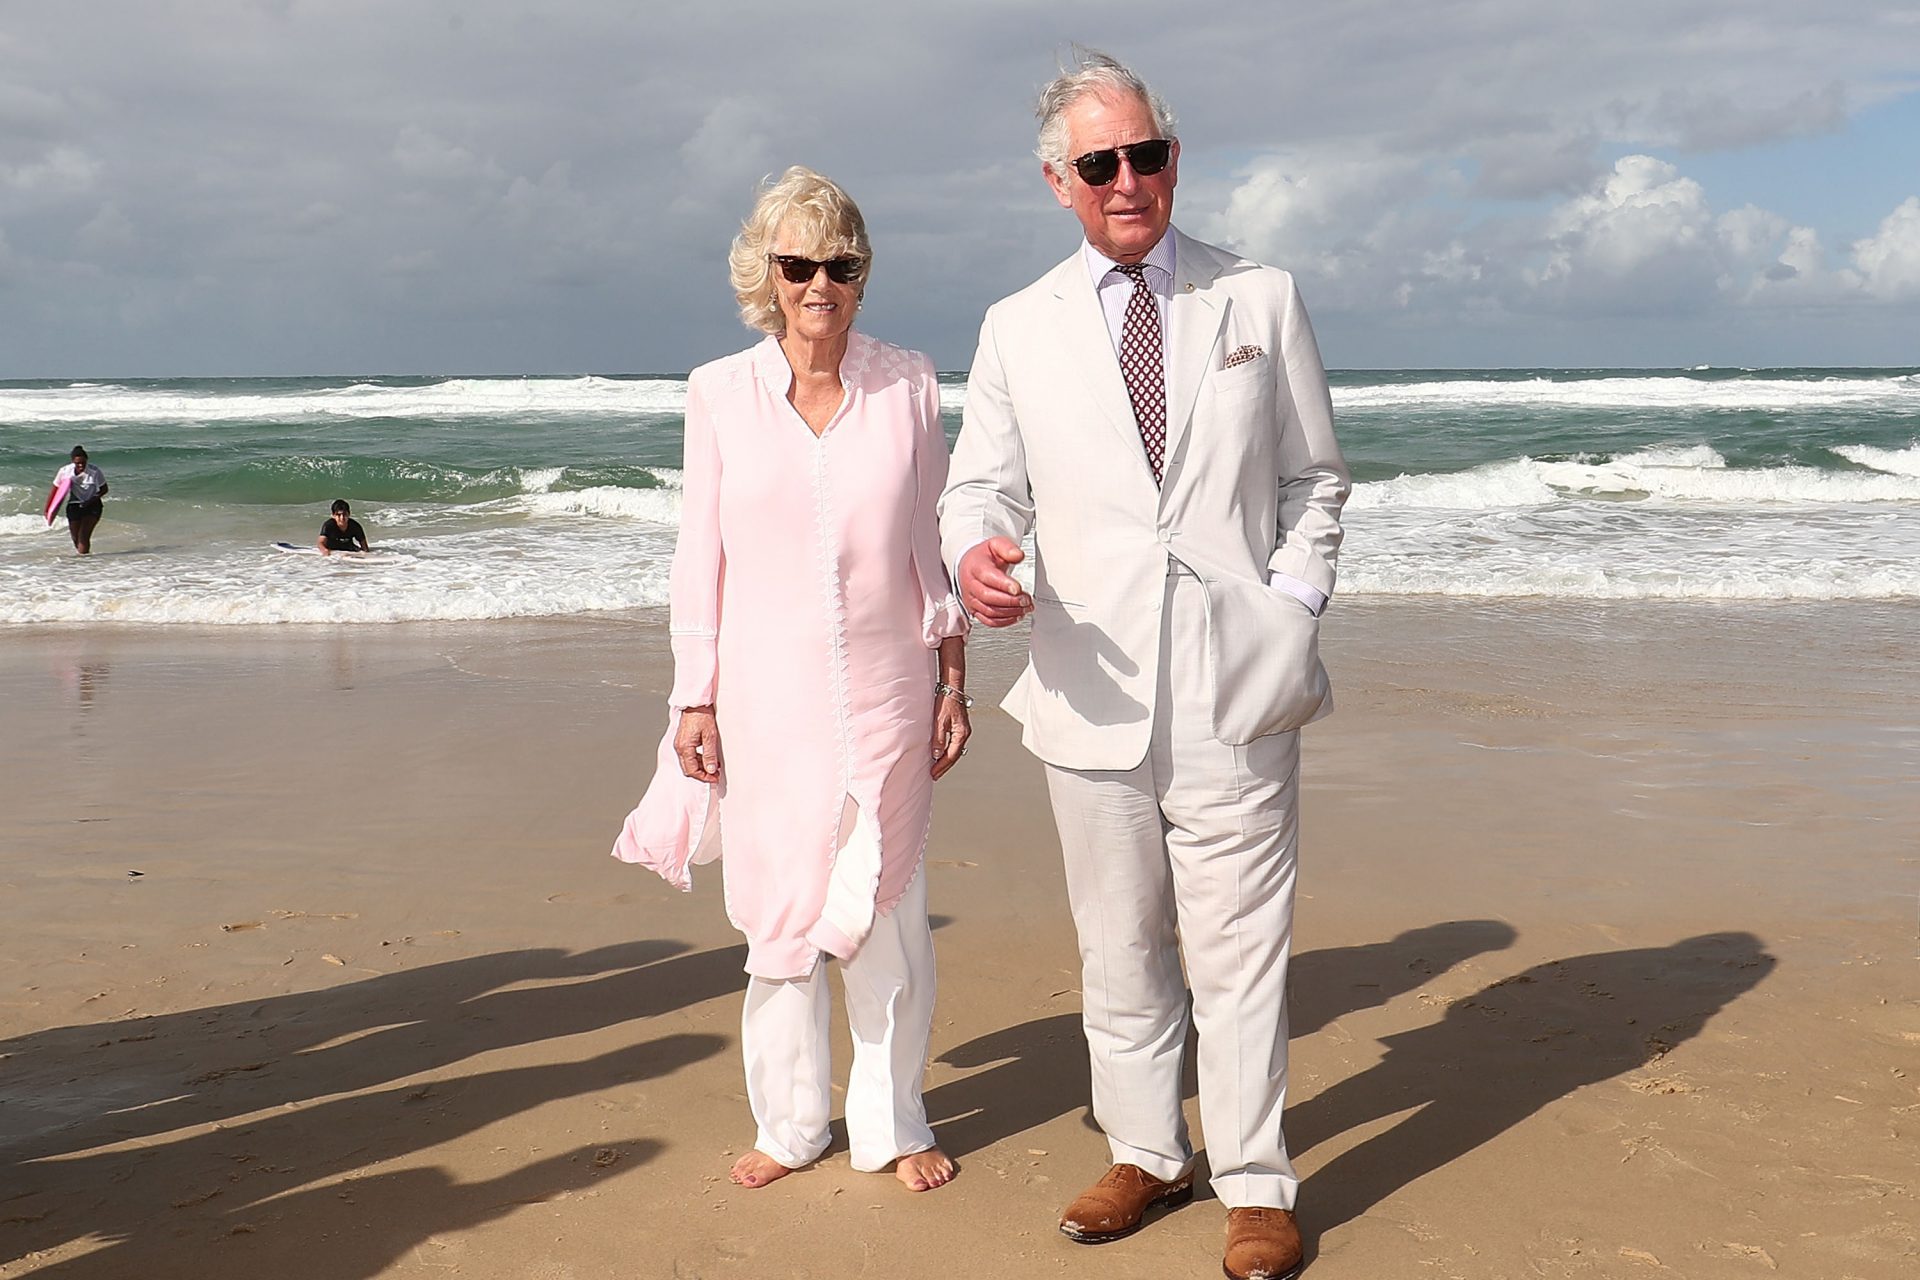 Camilla and Charles on the beach in Australia